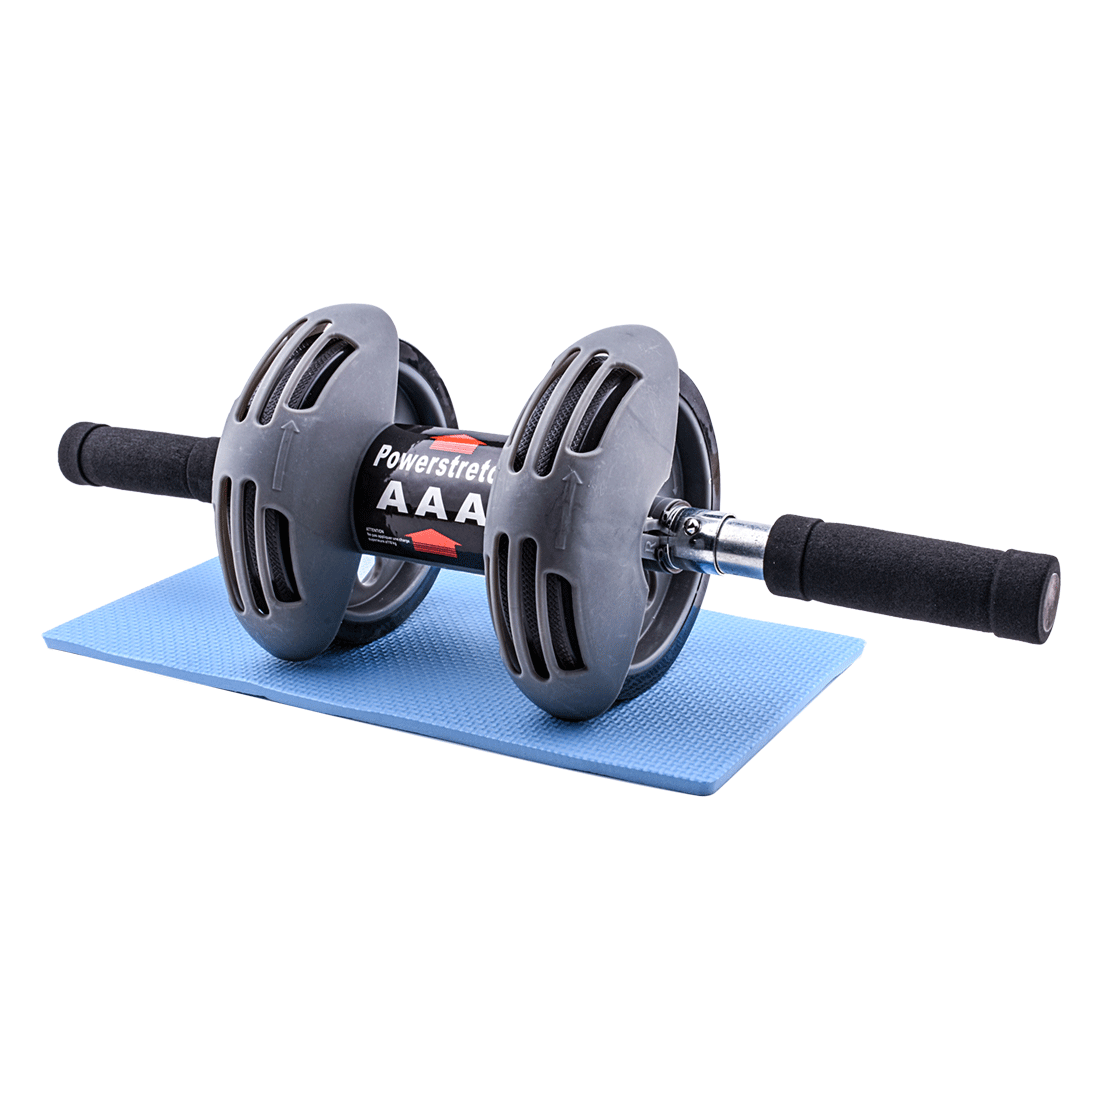 AB Power Roller Wheels Workout Equipment Gym Equipment Exercise Machine Abdominal Muscle Health and Fitness for Home Training: Default Title